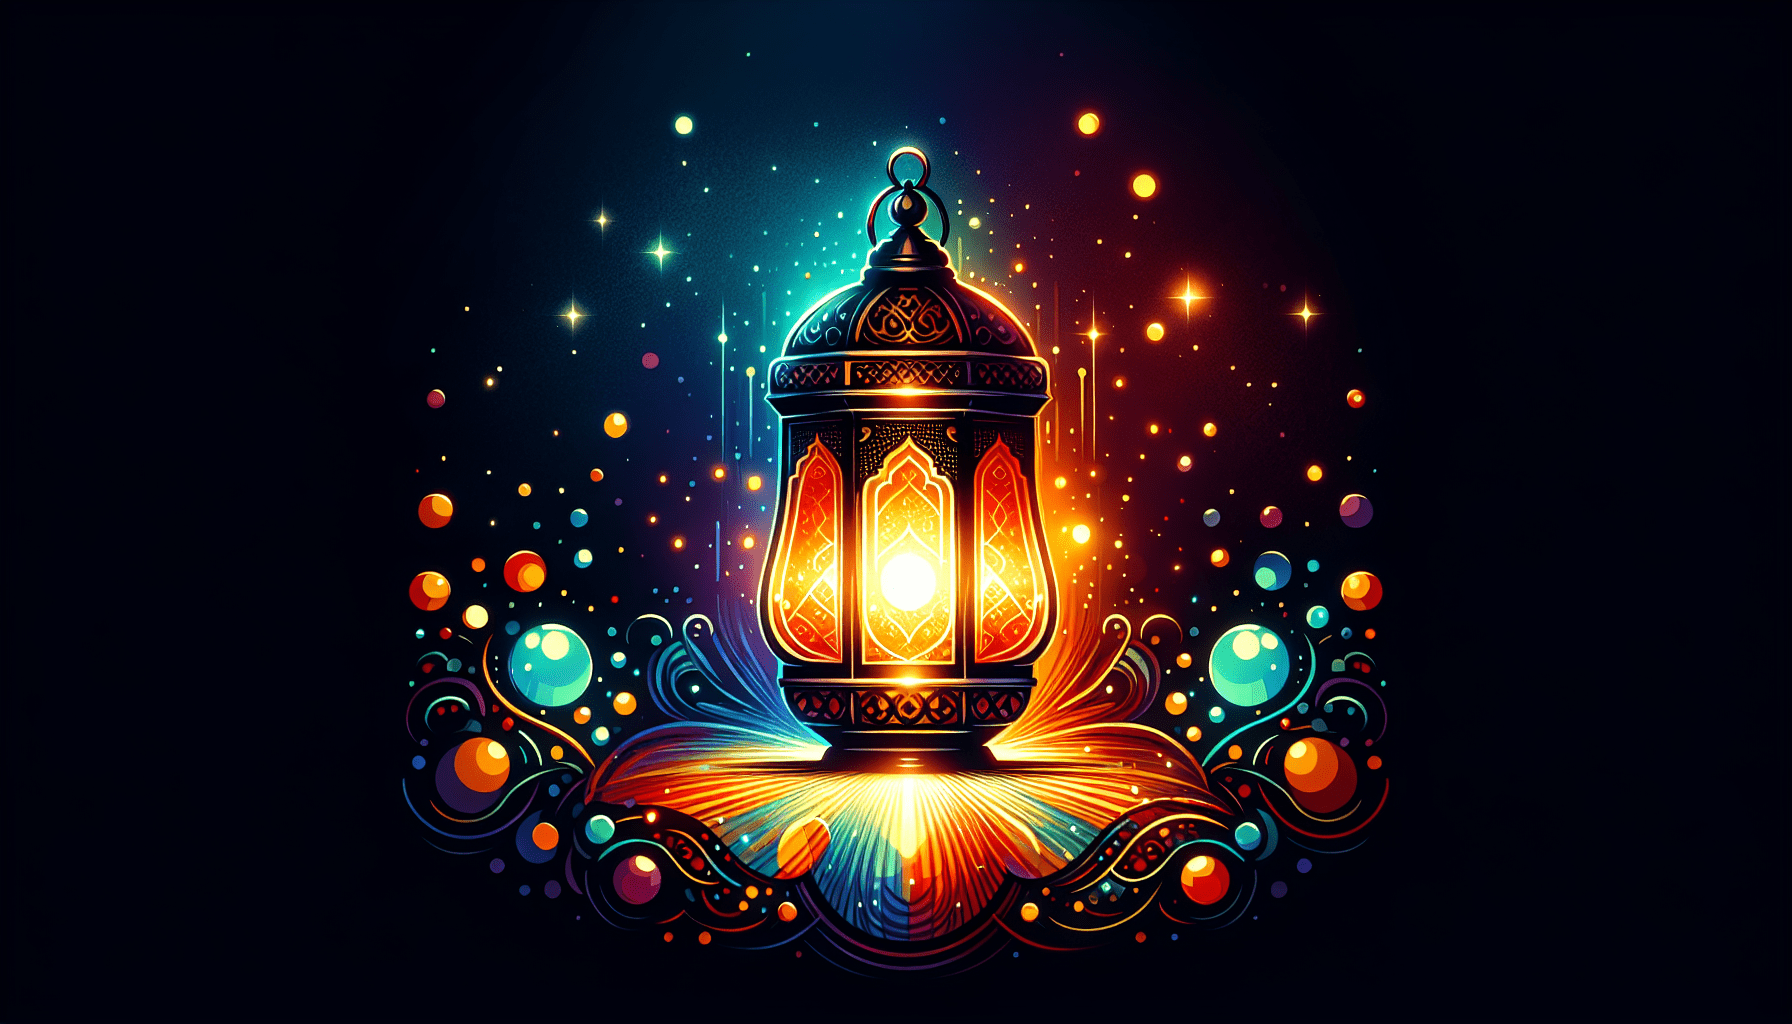 A glowing lantern with intricate designs emits colorful lights, reminiscent of Turkey's vibrant culture, surrounded by swirling patterns and orbs in a dark background.